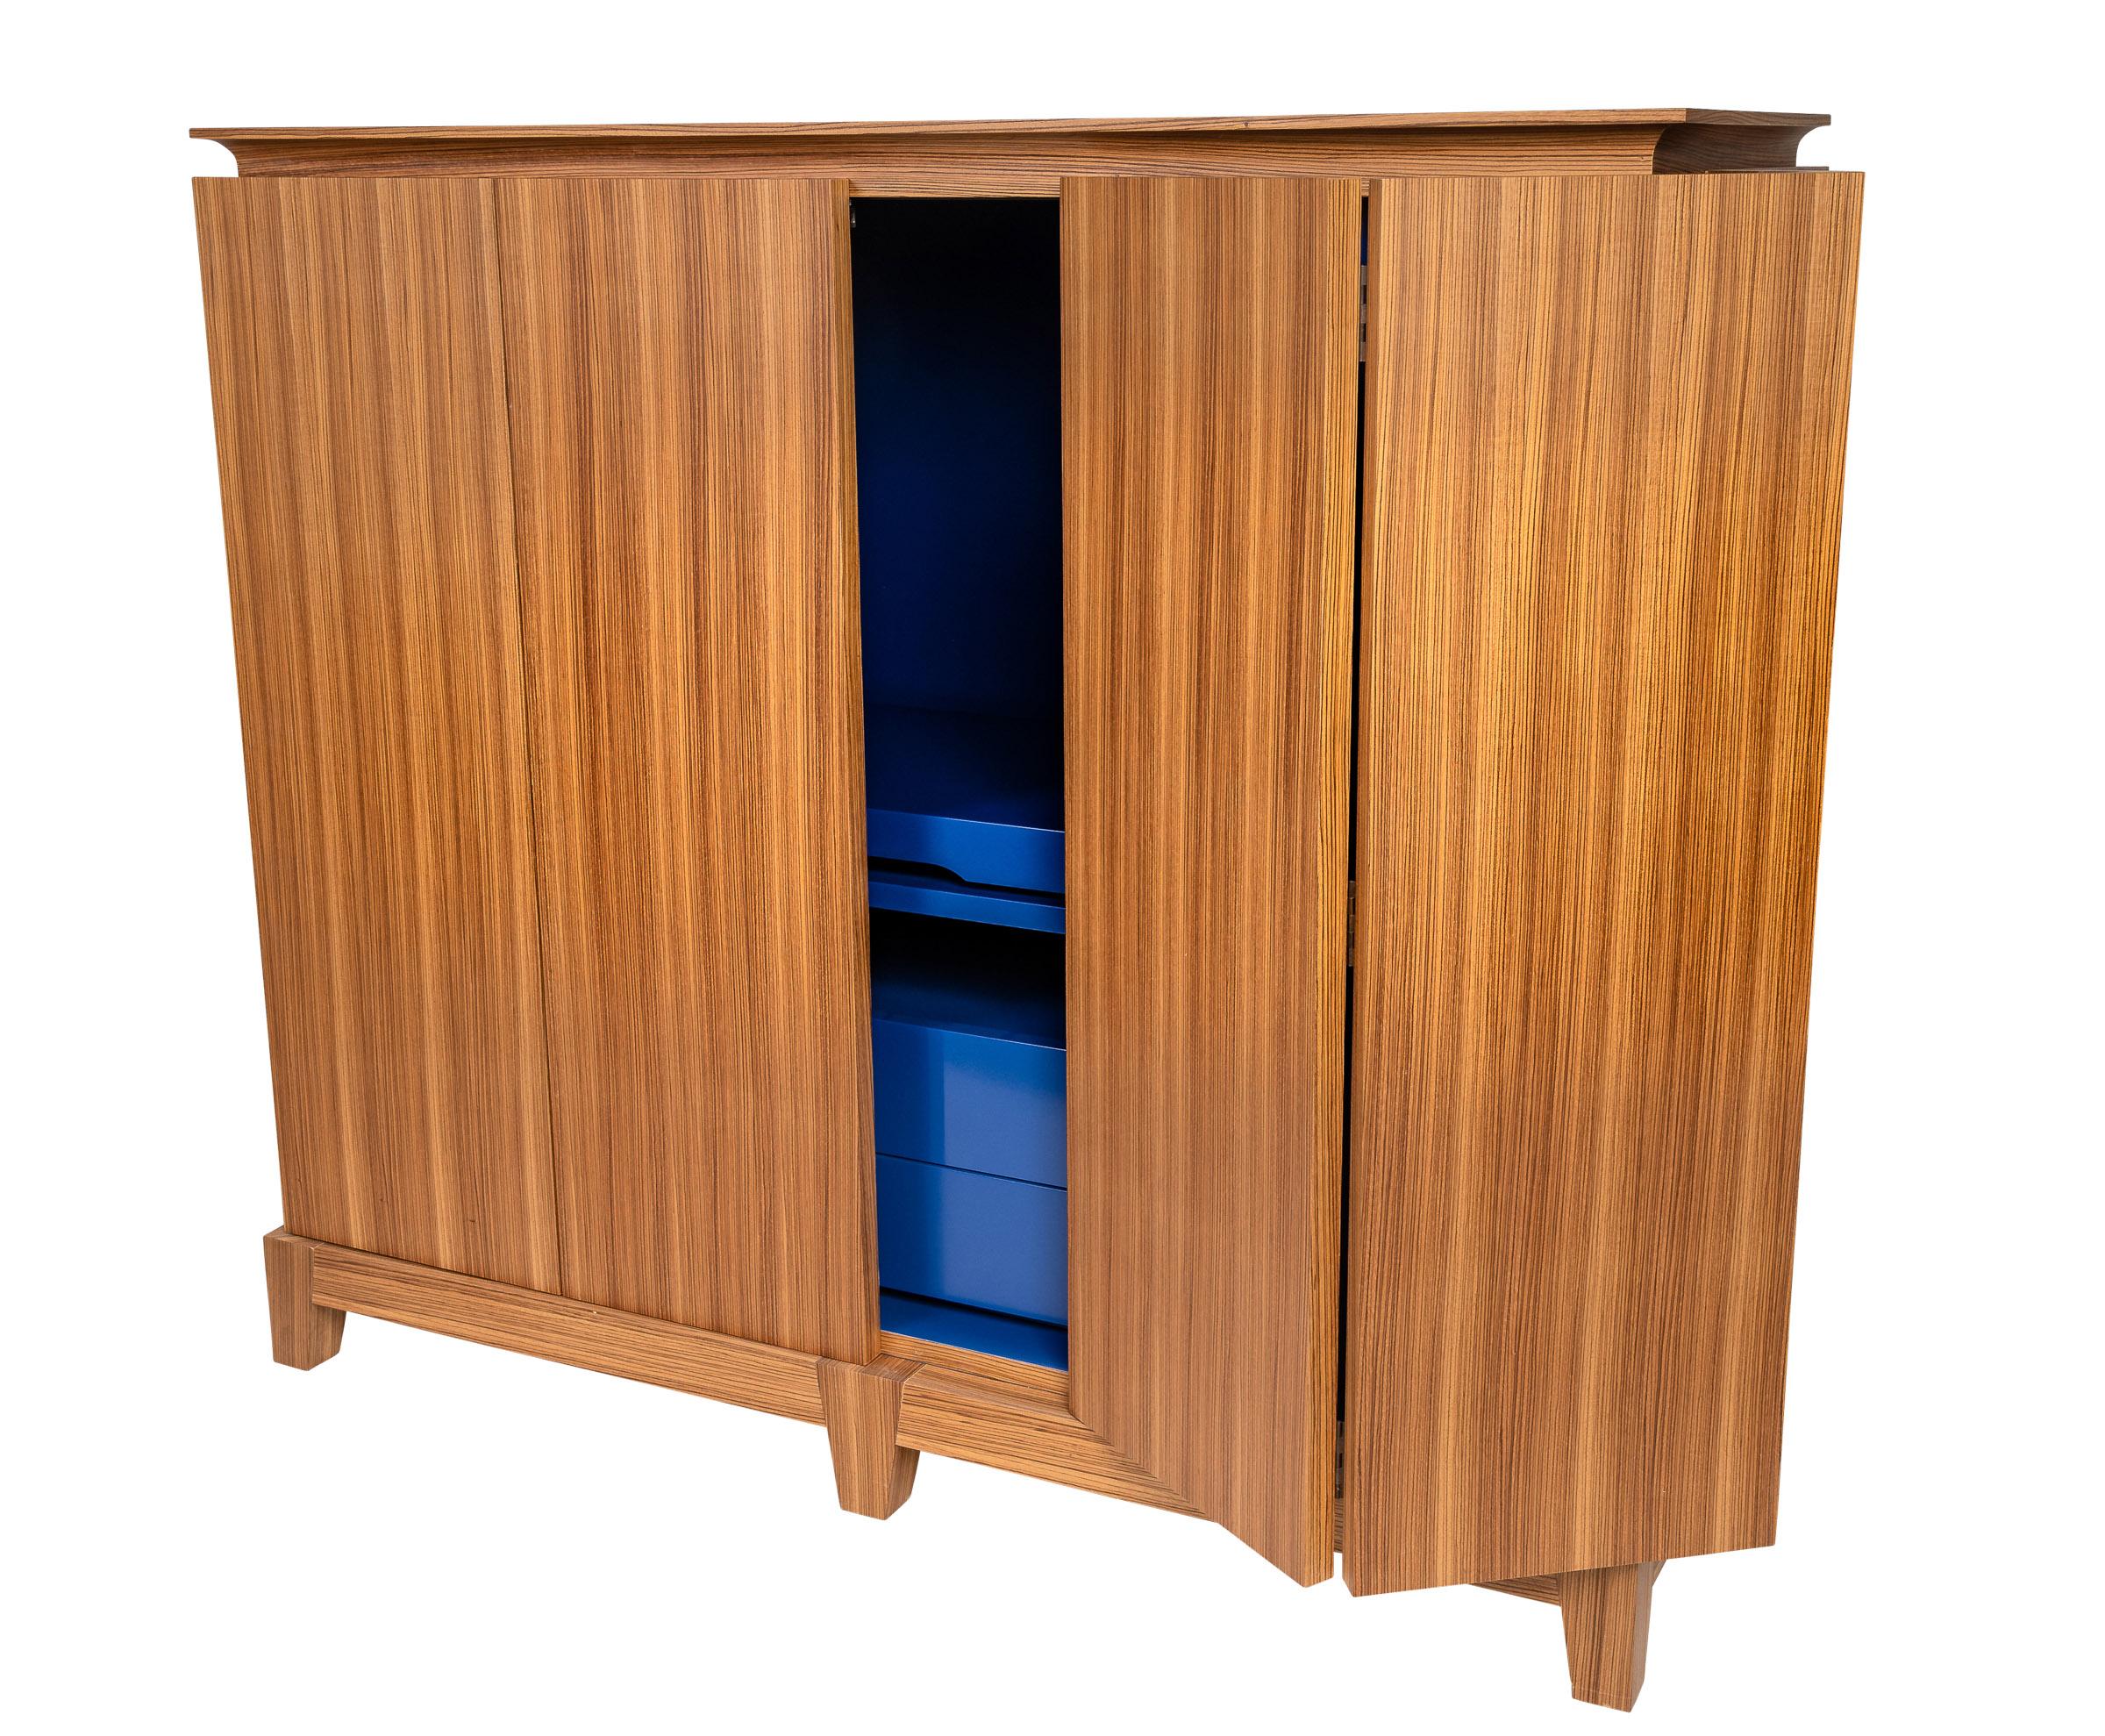 This beautifully crafted cabinet from Promemoria has a luminous secret. When you open the TV cabinet, you can see the Yves Klein blue lacquer finish on the inside, which makes this piece unique. The interior has integrated shelves and drawers as